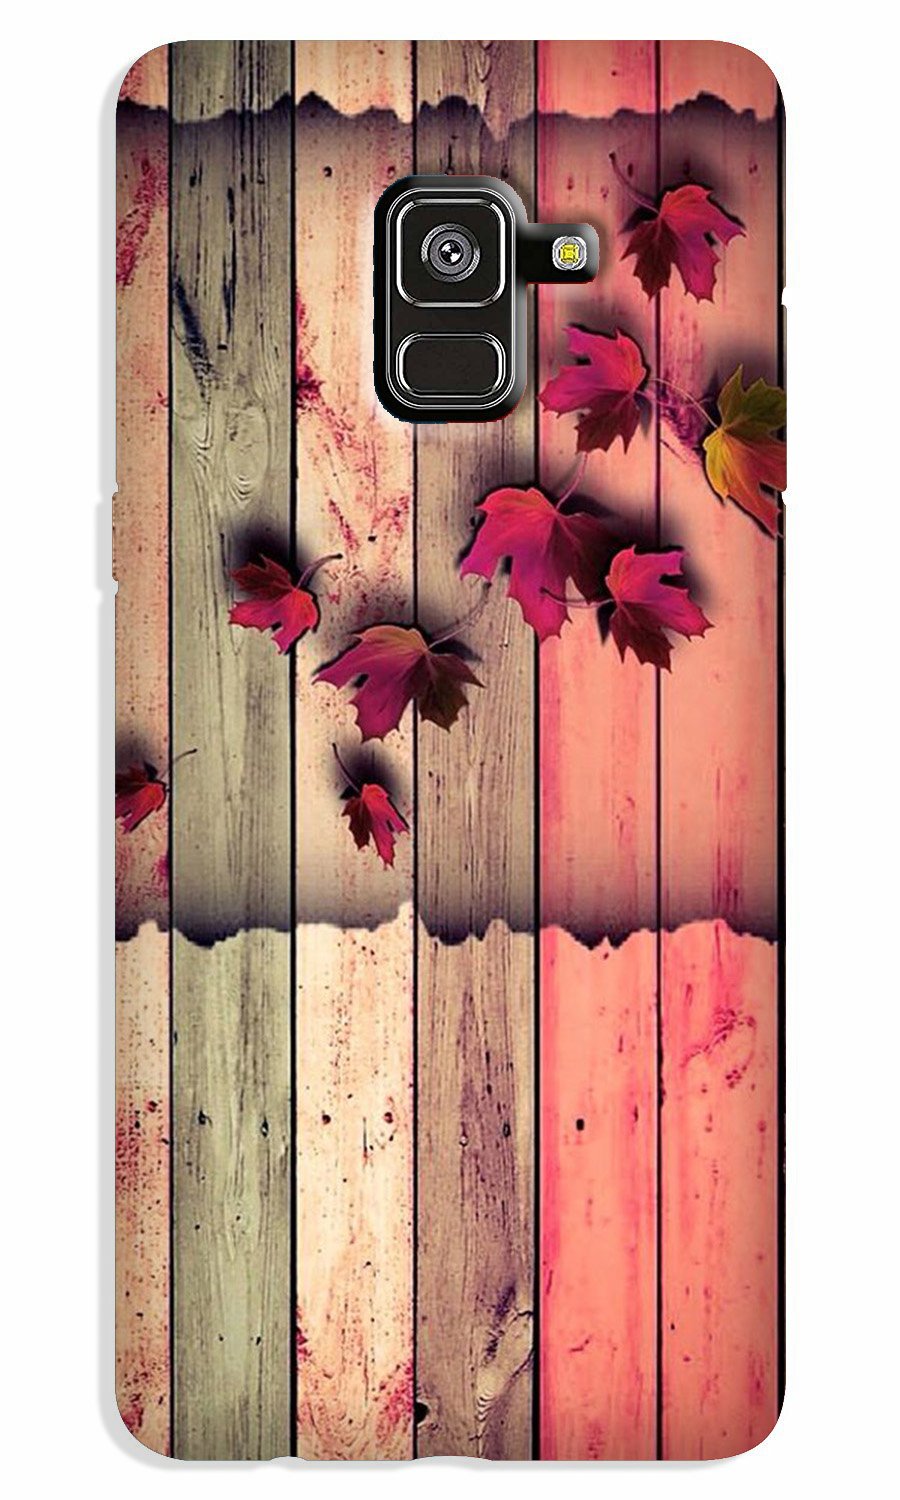 Wooden look2 Case for Galaxy A8 Plus